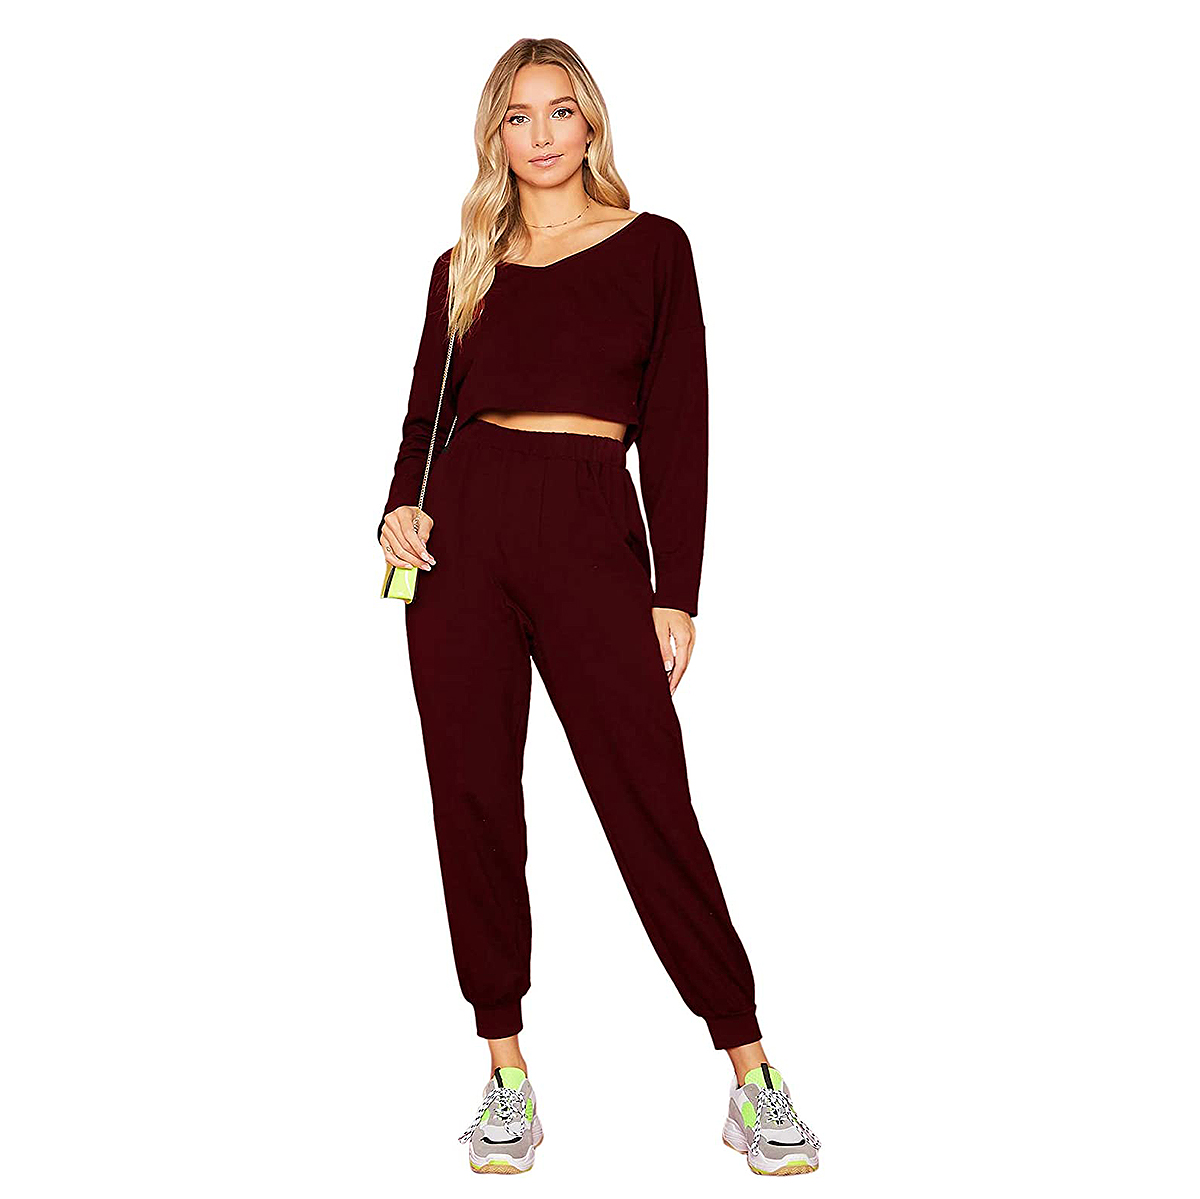 2-Piece Sweat Sets You’ll Love to Wear in and Out of the House